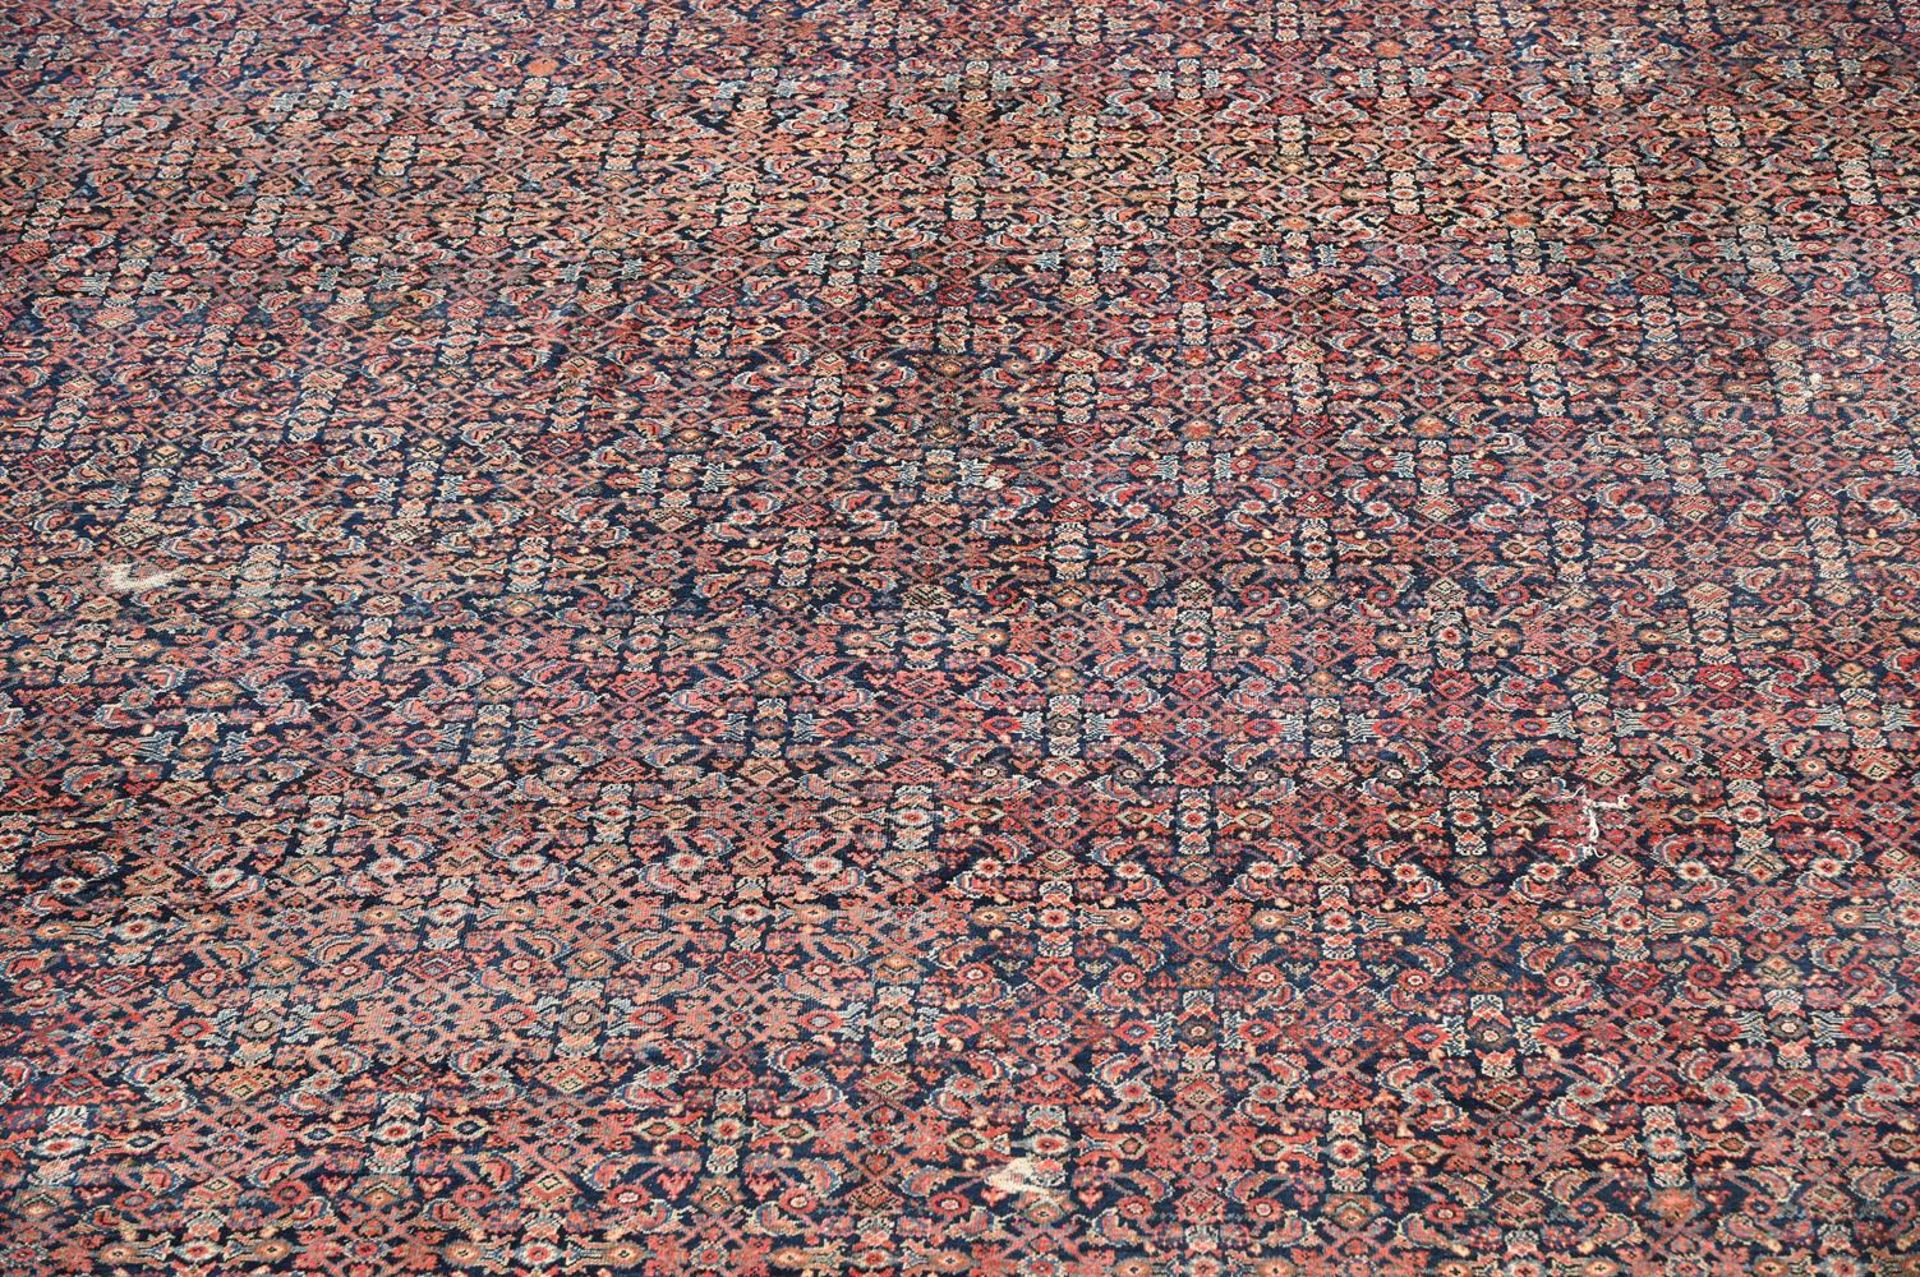 A LARGE FERAGHAN CARPET, WEST PERSIA, LATE 19TH CENTURY, approximately 682 x 580cm - Image 2 of 4